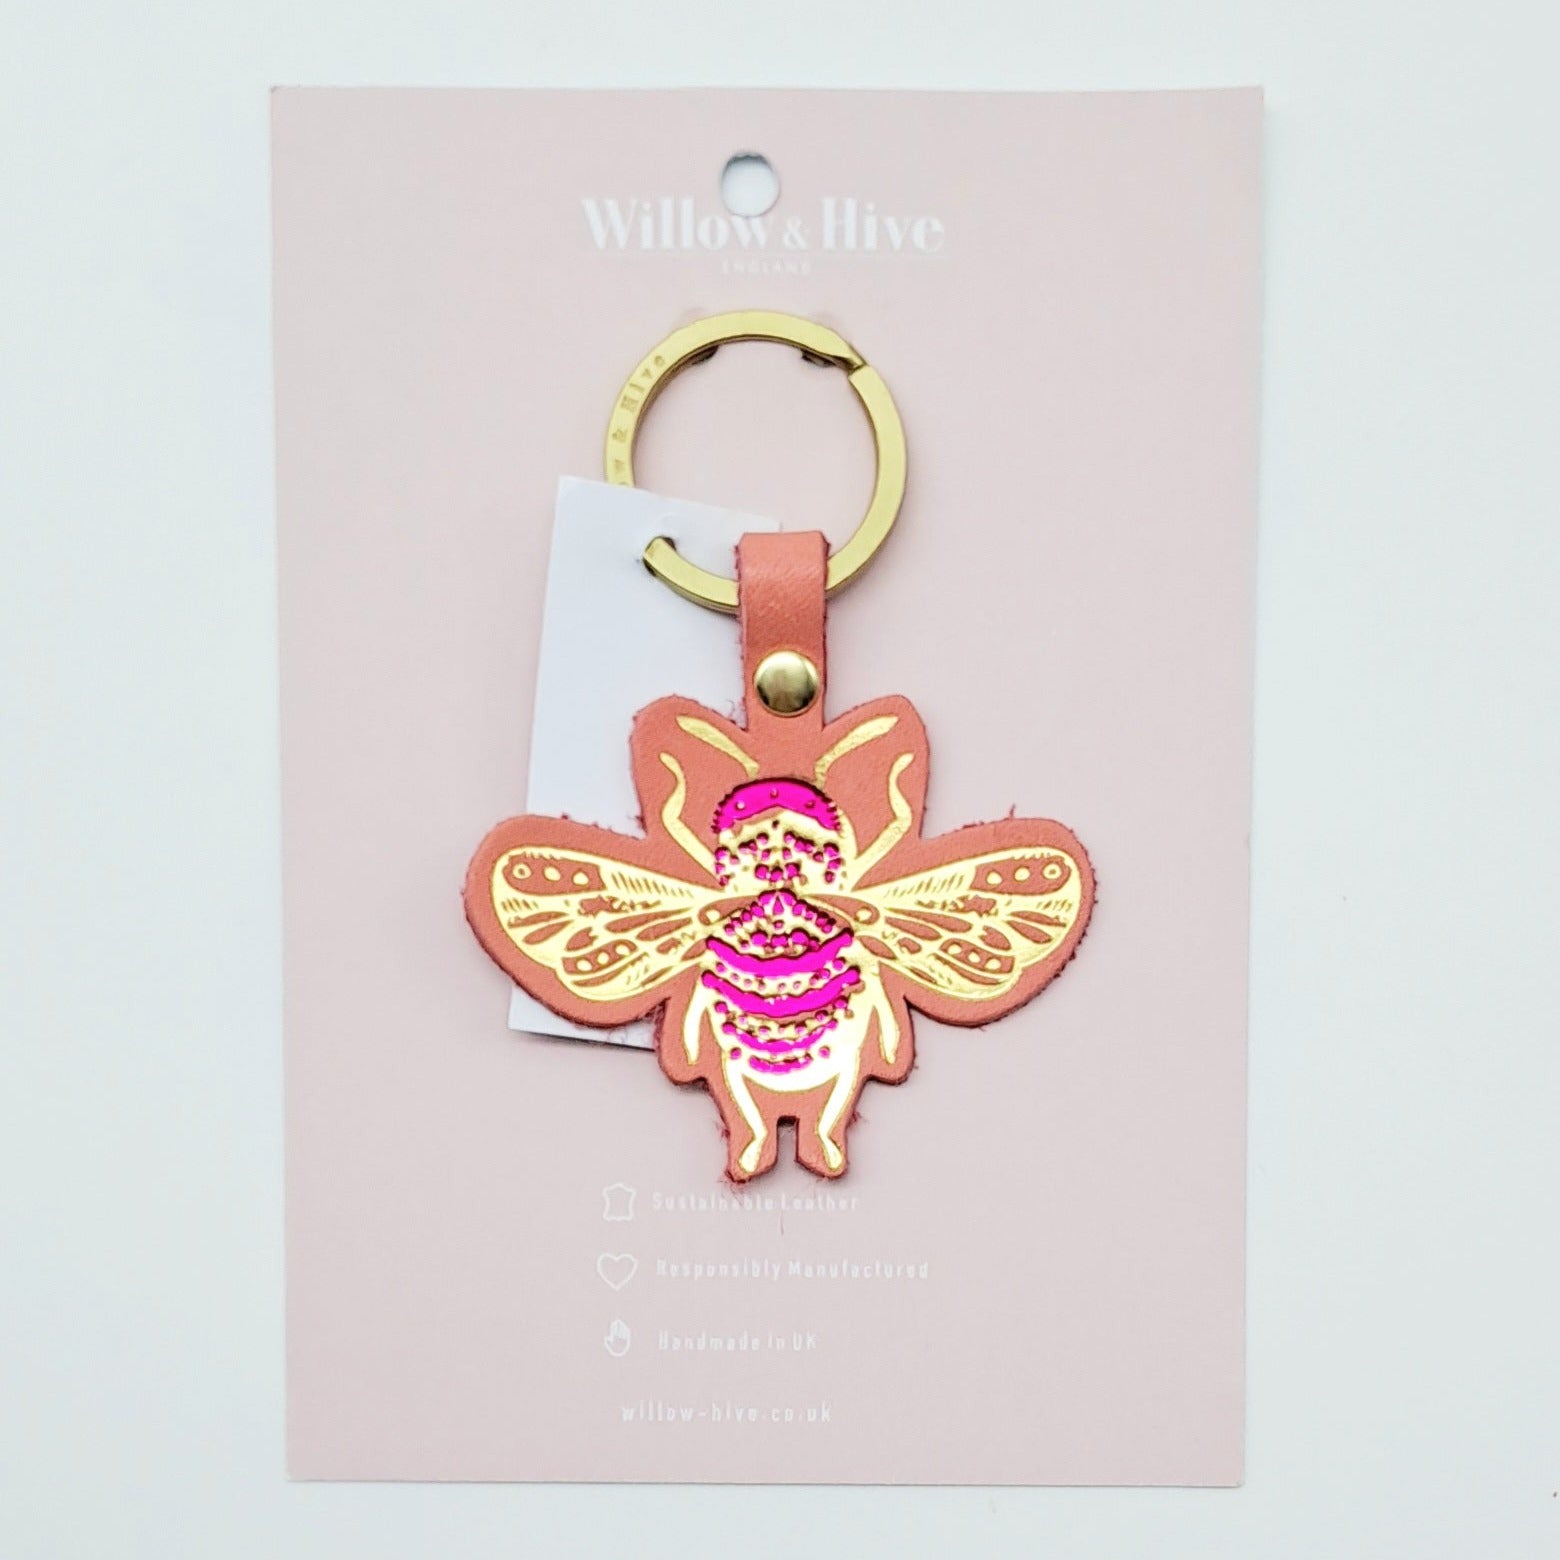 Willow & Hive Leather Bees Key ring